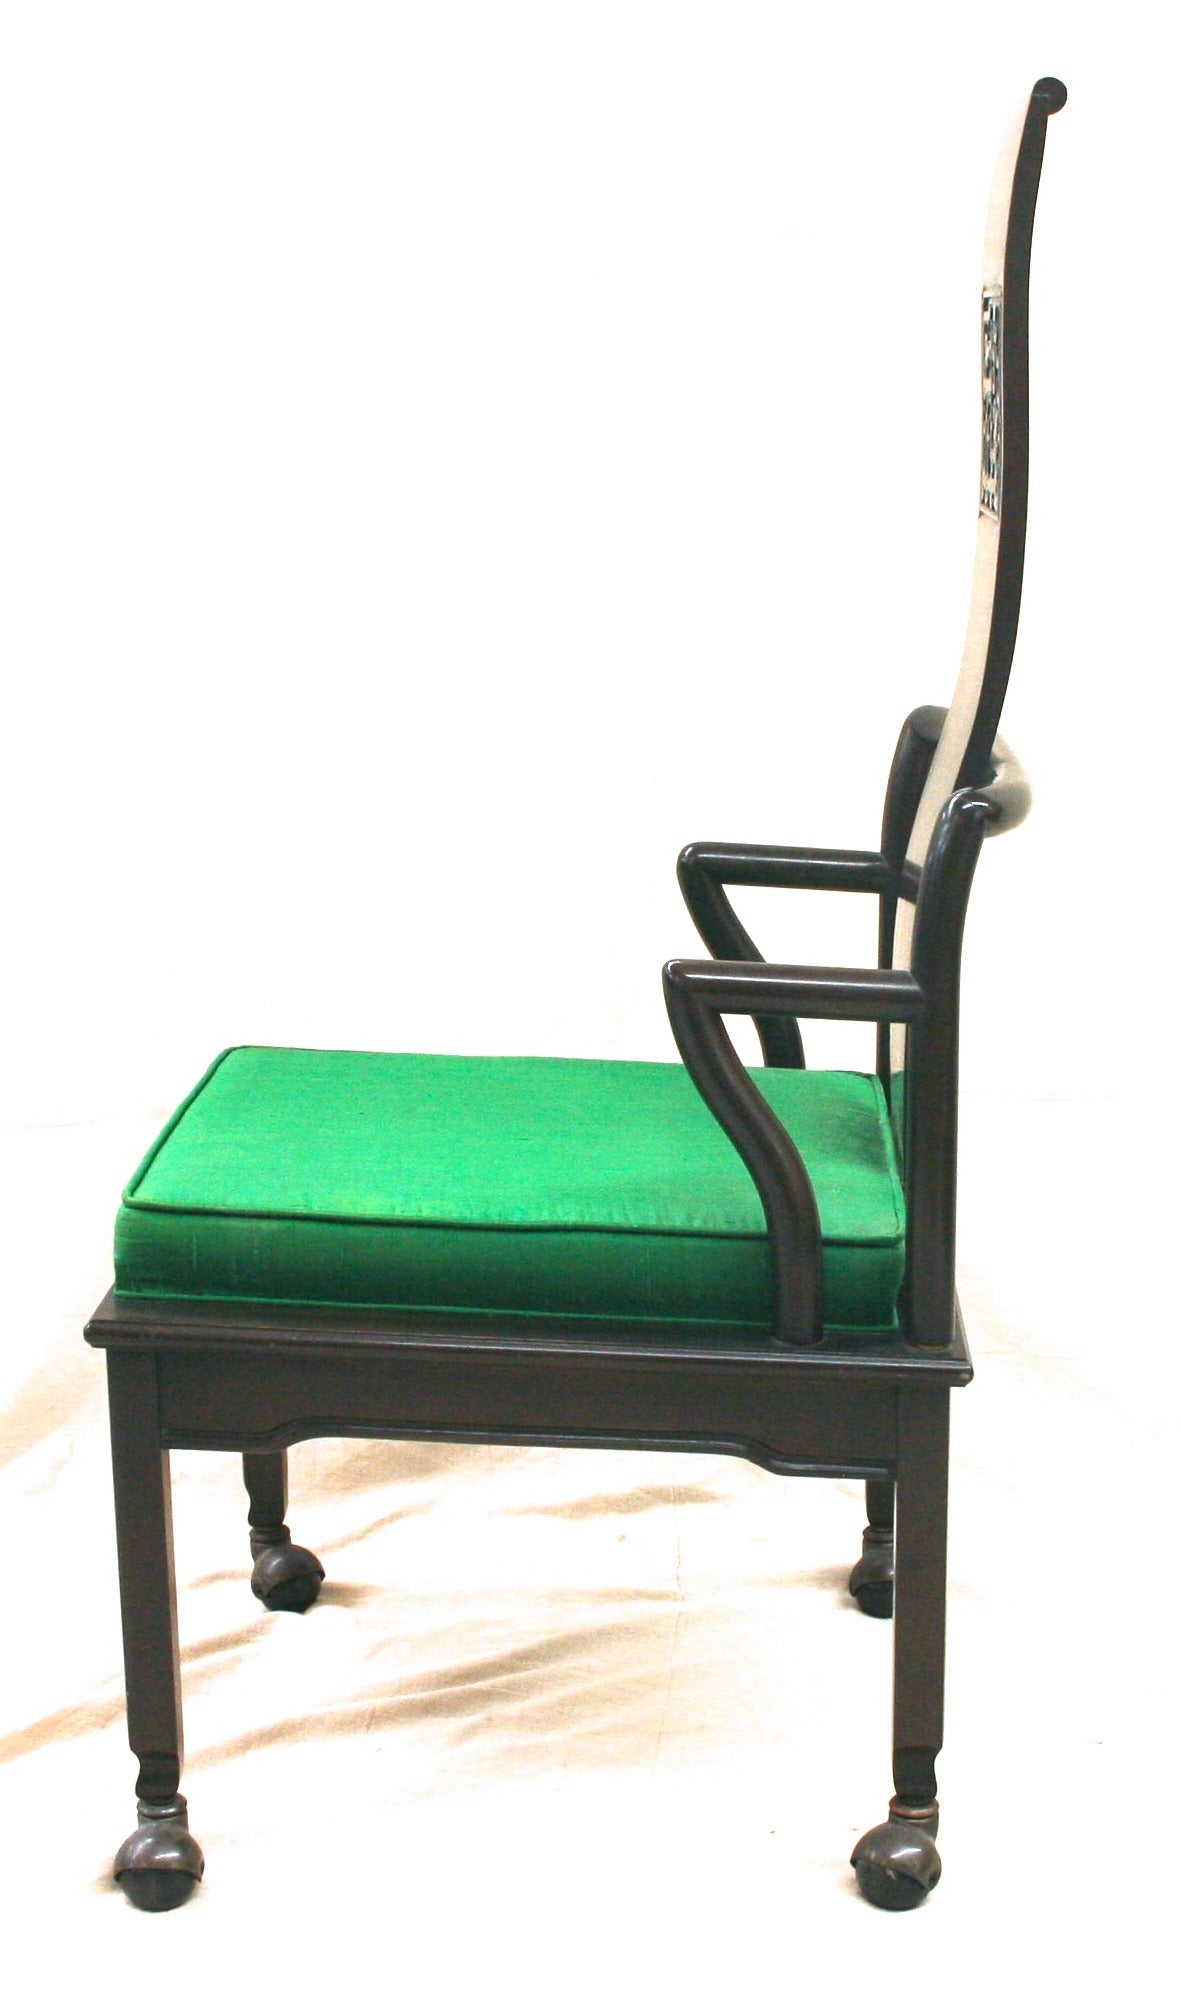 Set of six dining chairs by John Widdicomb in Mid-Century Modern Chinese inspired style. Black lacquered wood frames with green silk cushions. Two high back chairs, four low cushion back chairs. All chairs have original casters on feet.